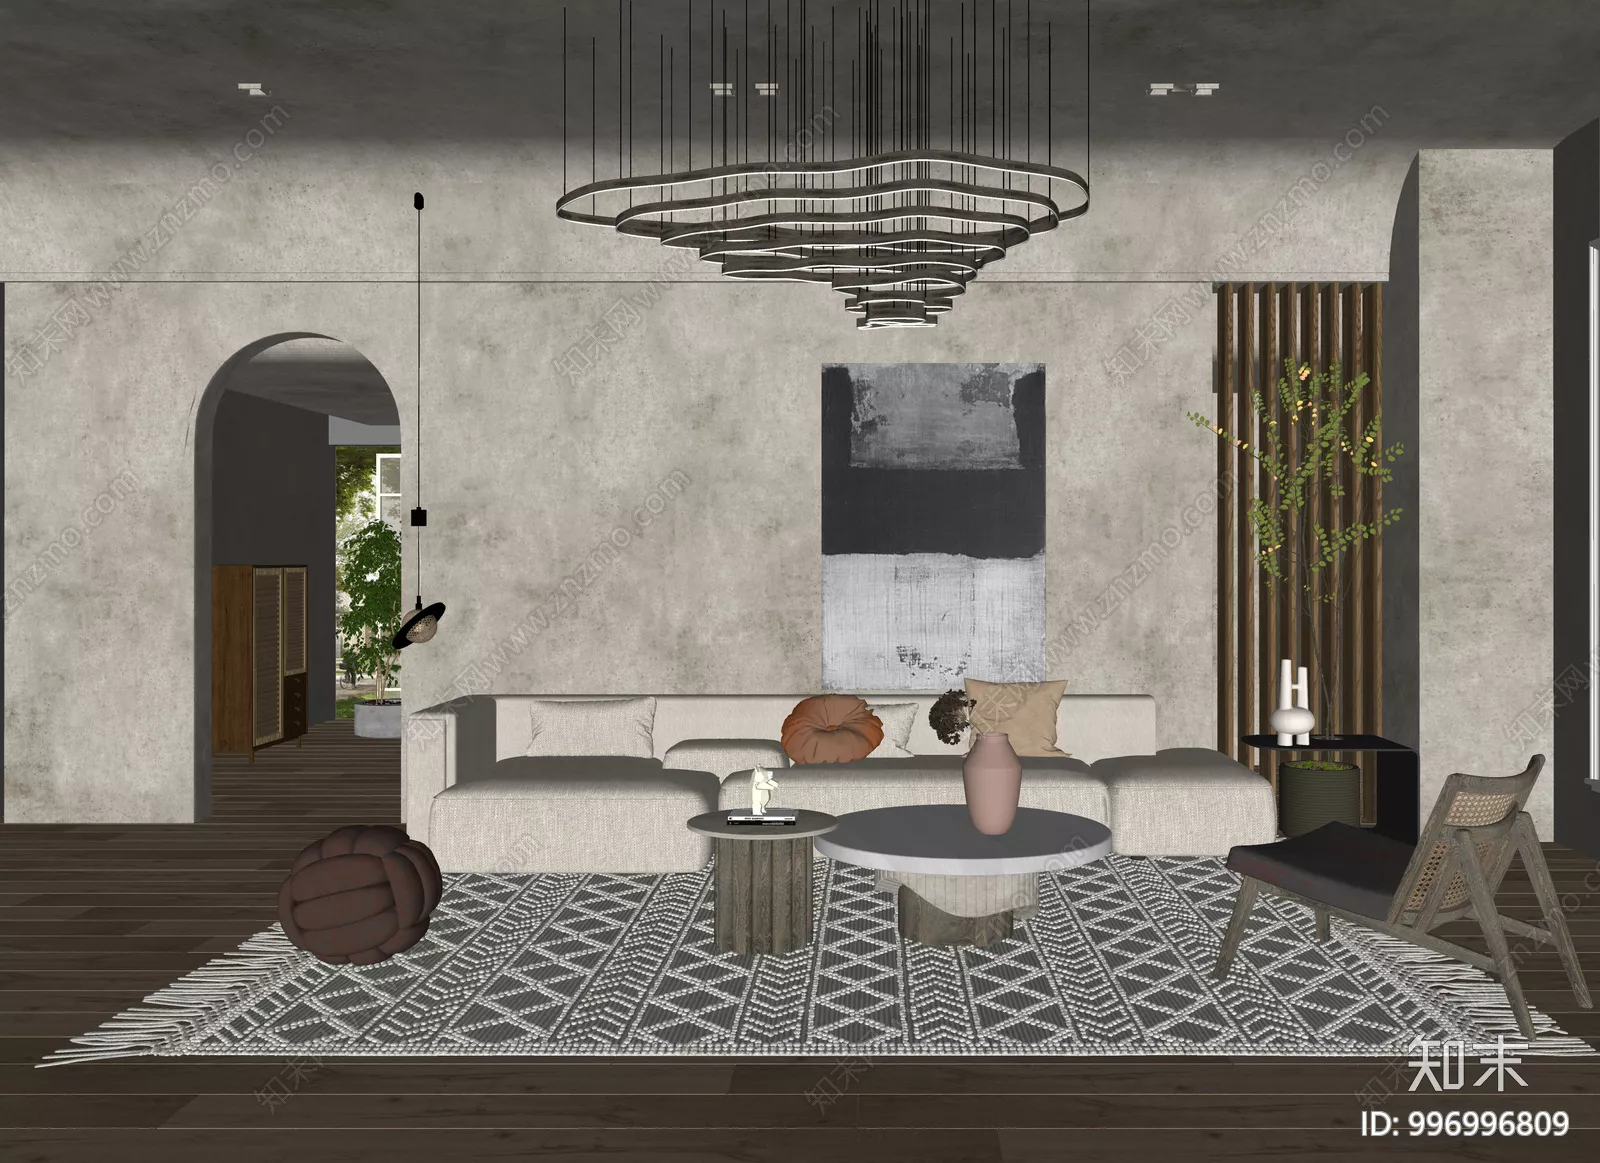 WABI SABI INTERIOR COLLECTION - SKETCHUP 3D SCENE - VRAY OR ENSCAPE - ID17923